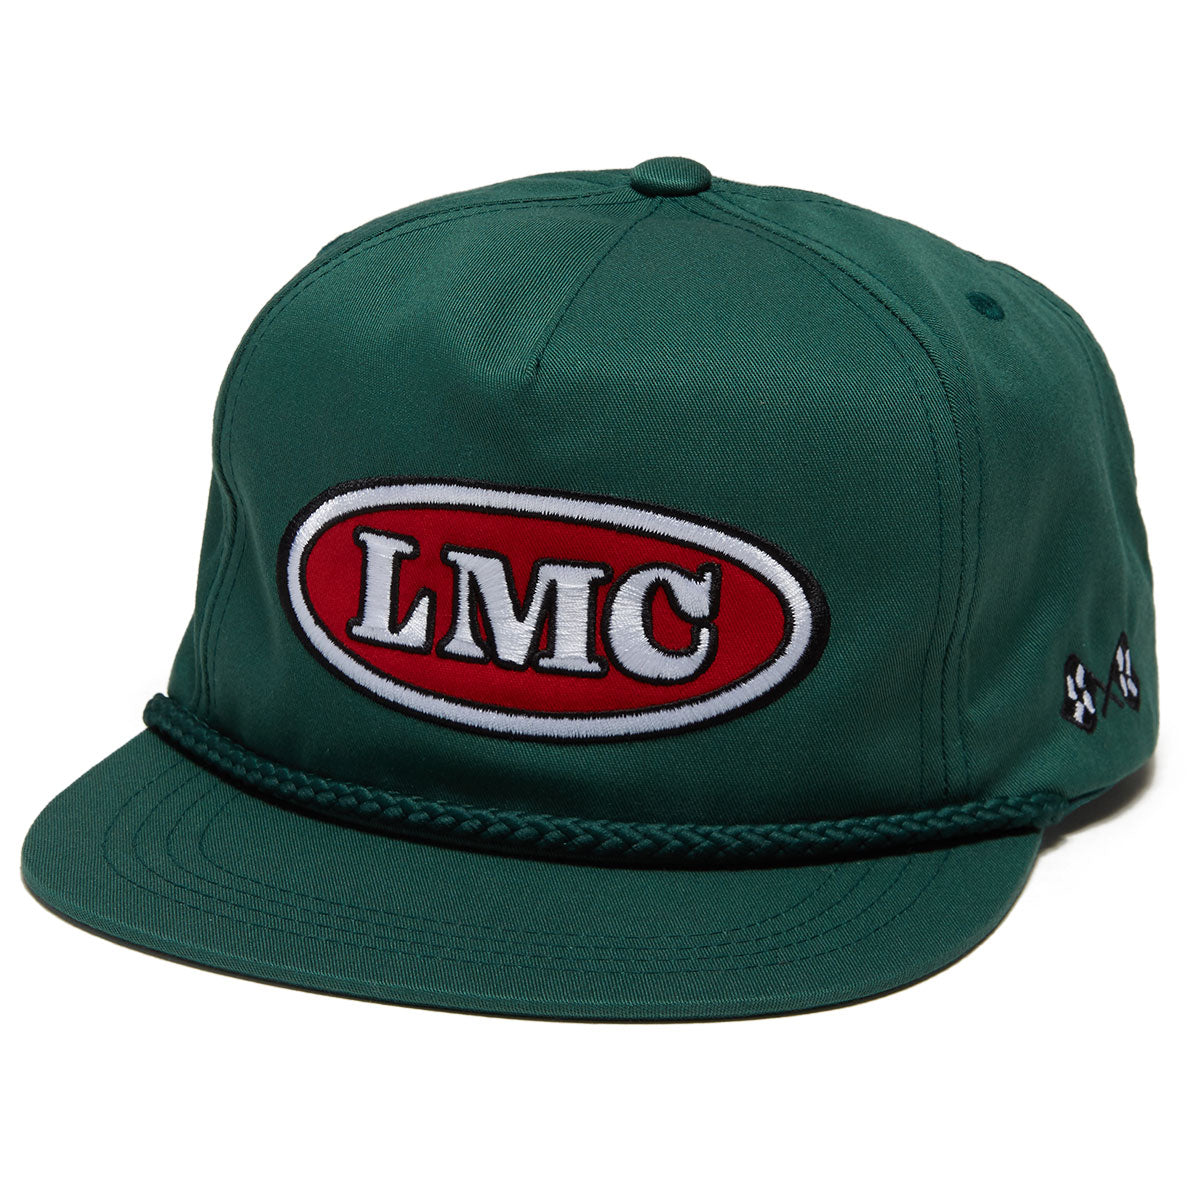 Loser Machine Pipes Hat - Green image 1